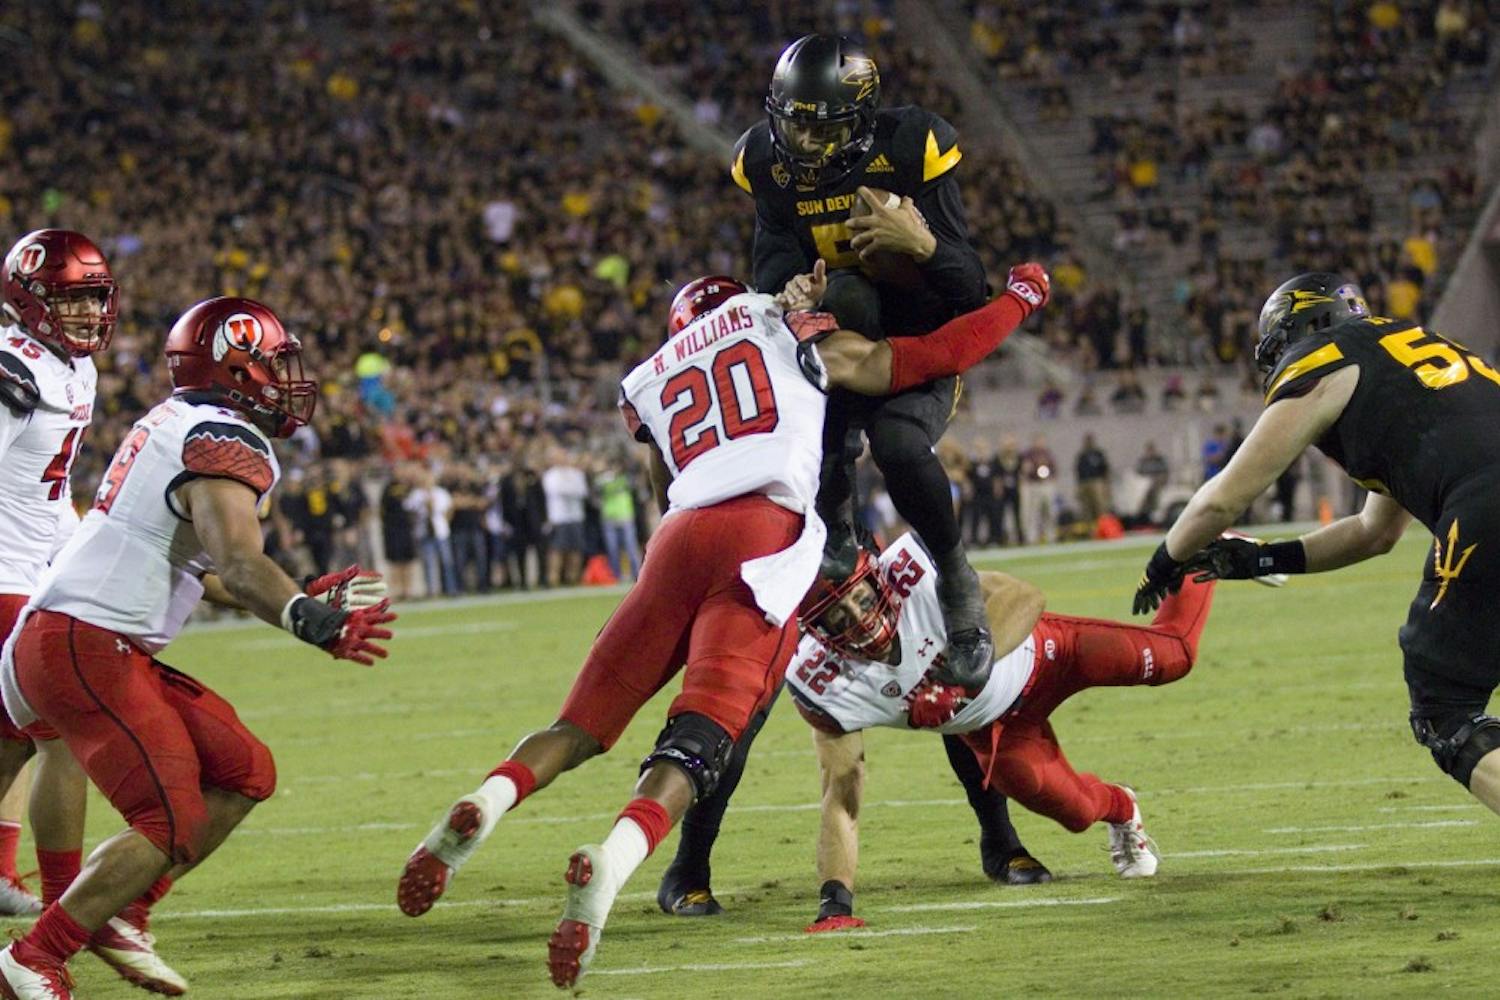 ASU sophomore quarterback Manny Wilkins (5) tries to hurdle a Utah free safety Marcus Williams on the goal line in the first half of a game versus the Utah Utes in Sun Devil Stadium in Tempe, Arizona, on Thursday, Nov. 10, 2016. 